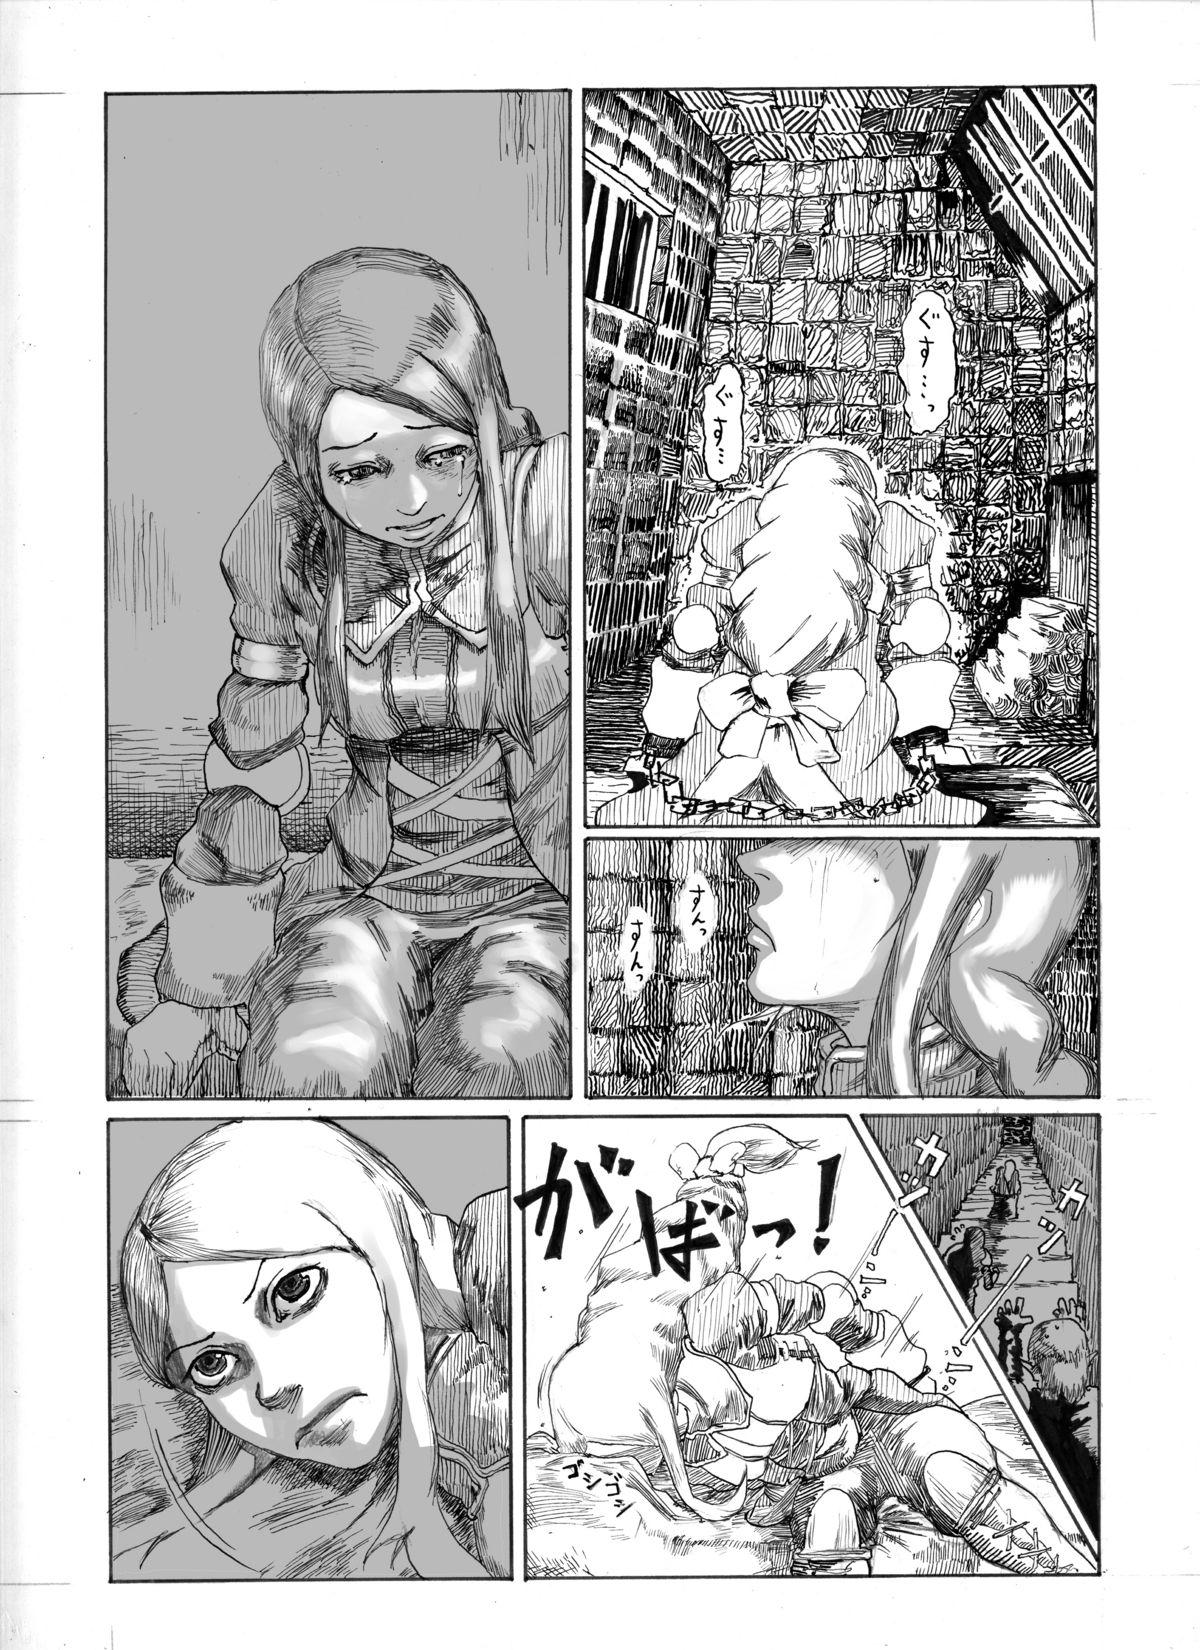 Twink Ove no Yome - Final fantasy tactics Indonesia - Page 3